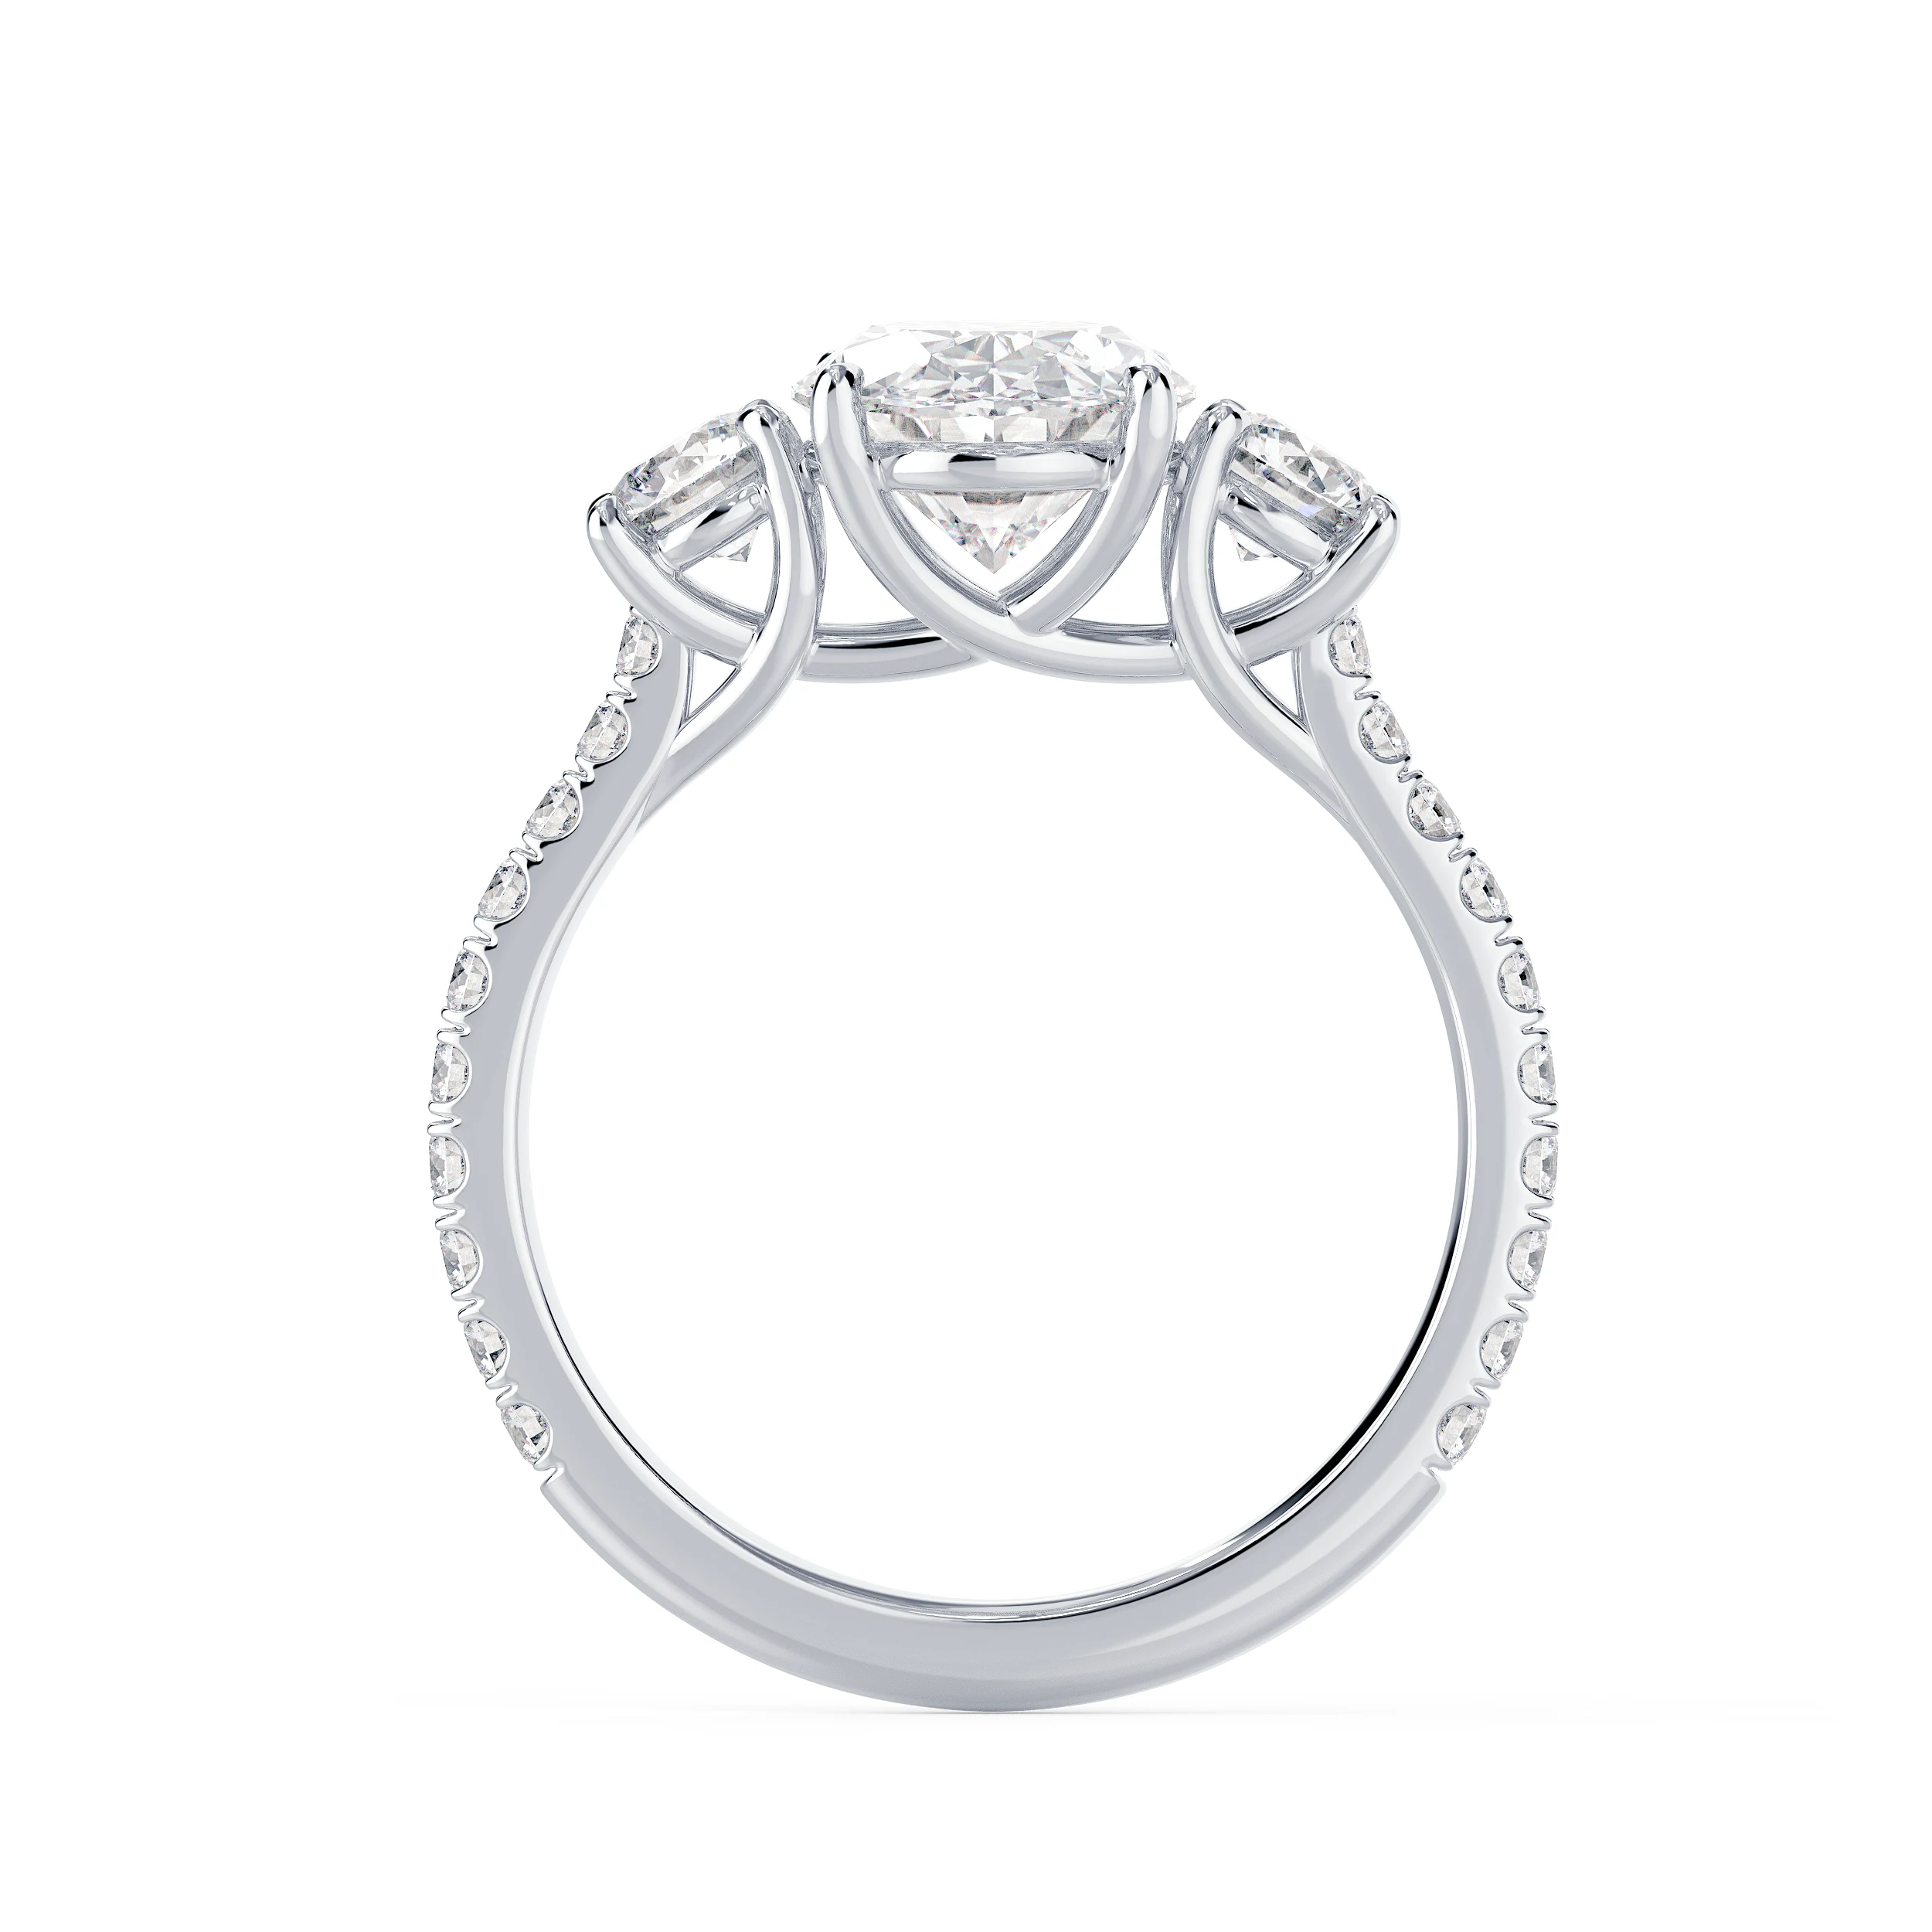 Lab Diamonds set in White Gold Oval and Round Three Stone Pavé Setting (Profile View)